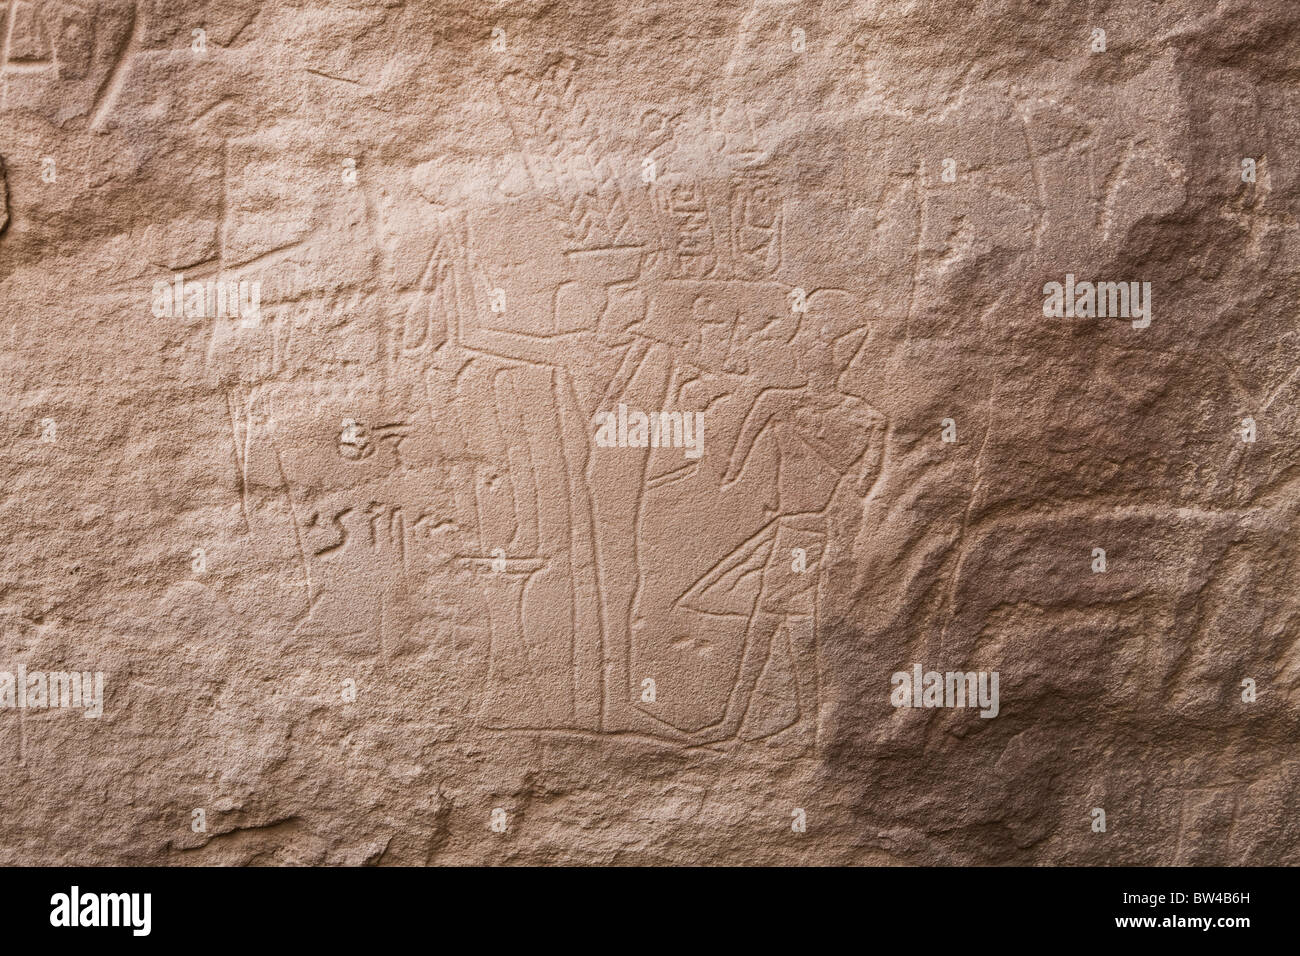 Depiction of Amenhotep before Min  etched in rock-face  in Wadi Mineh in Eastern Desert of Egypt Stock Photo